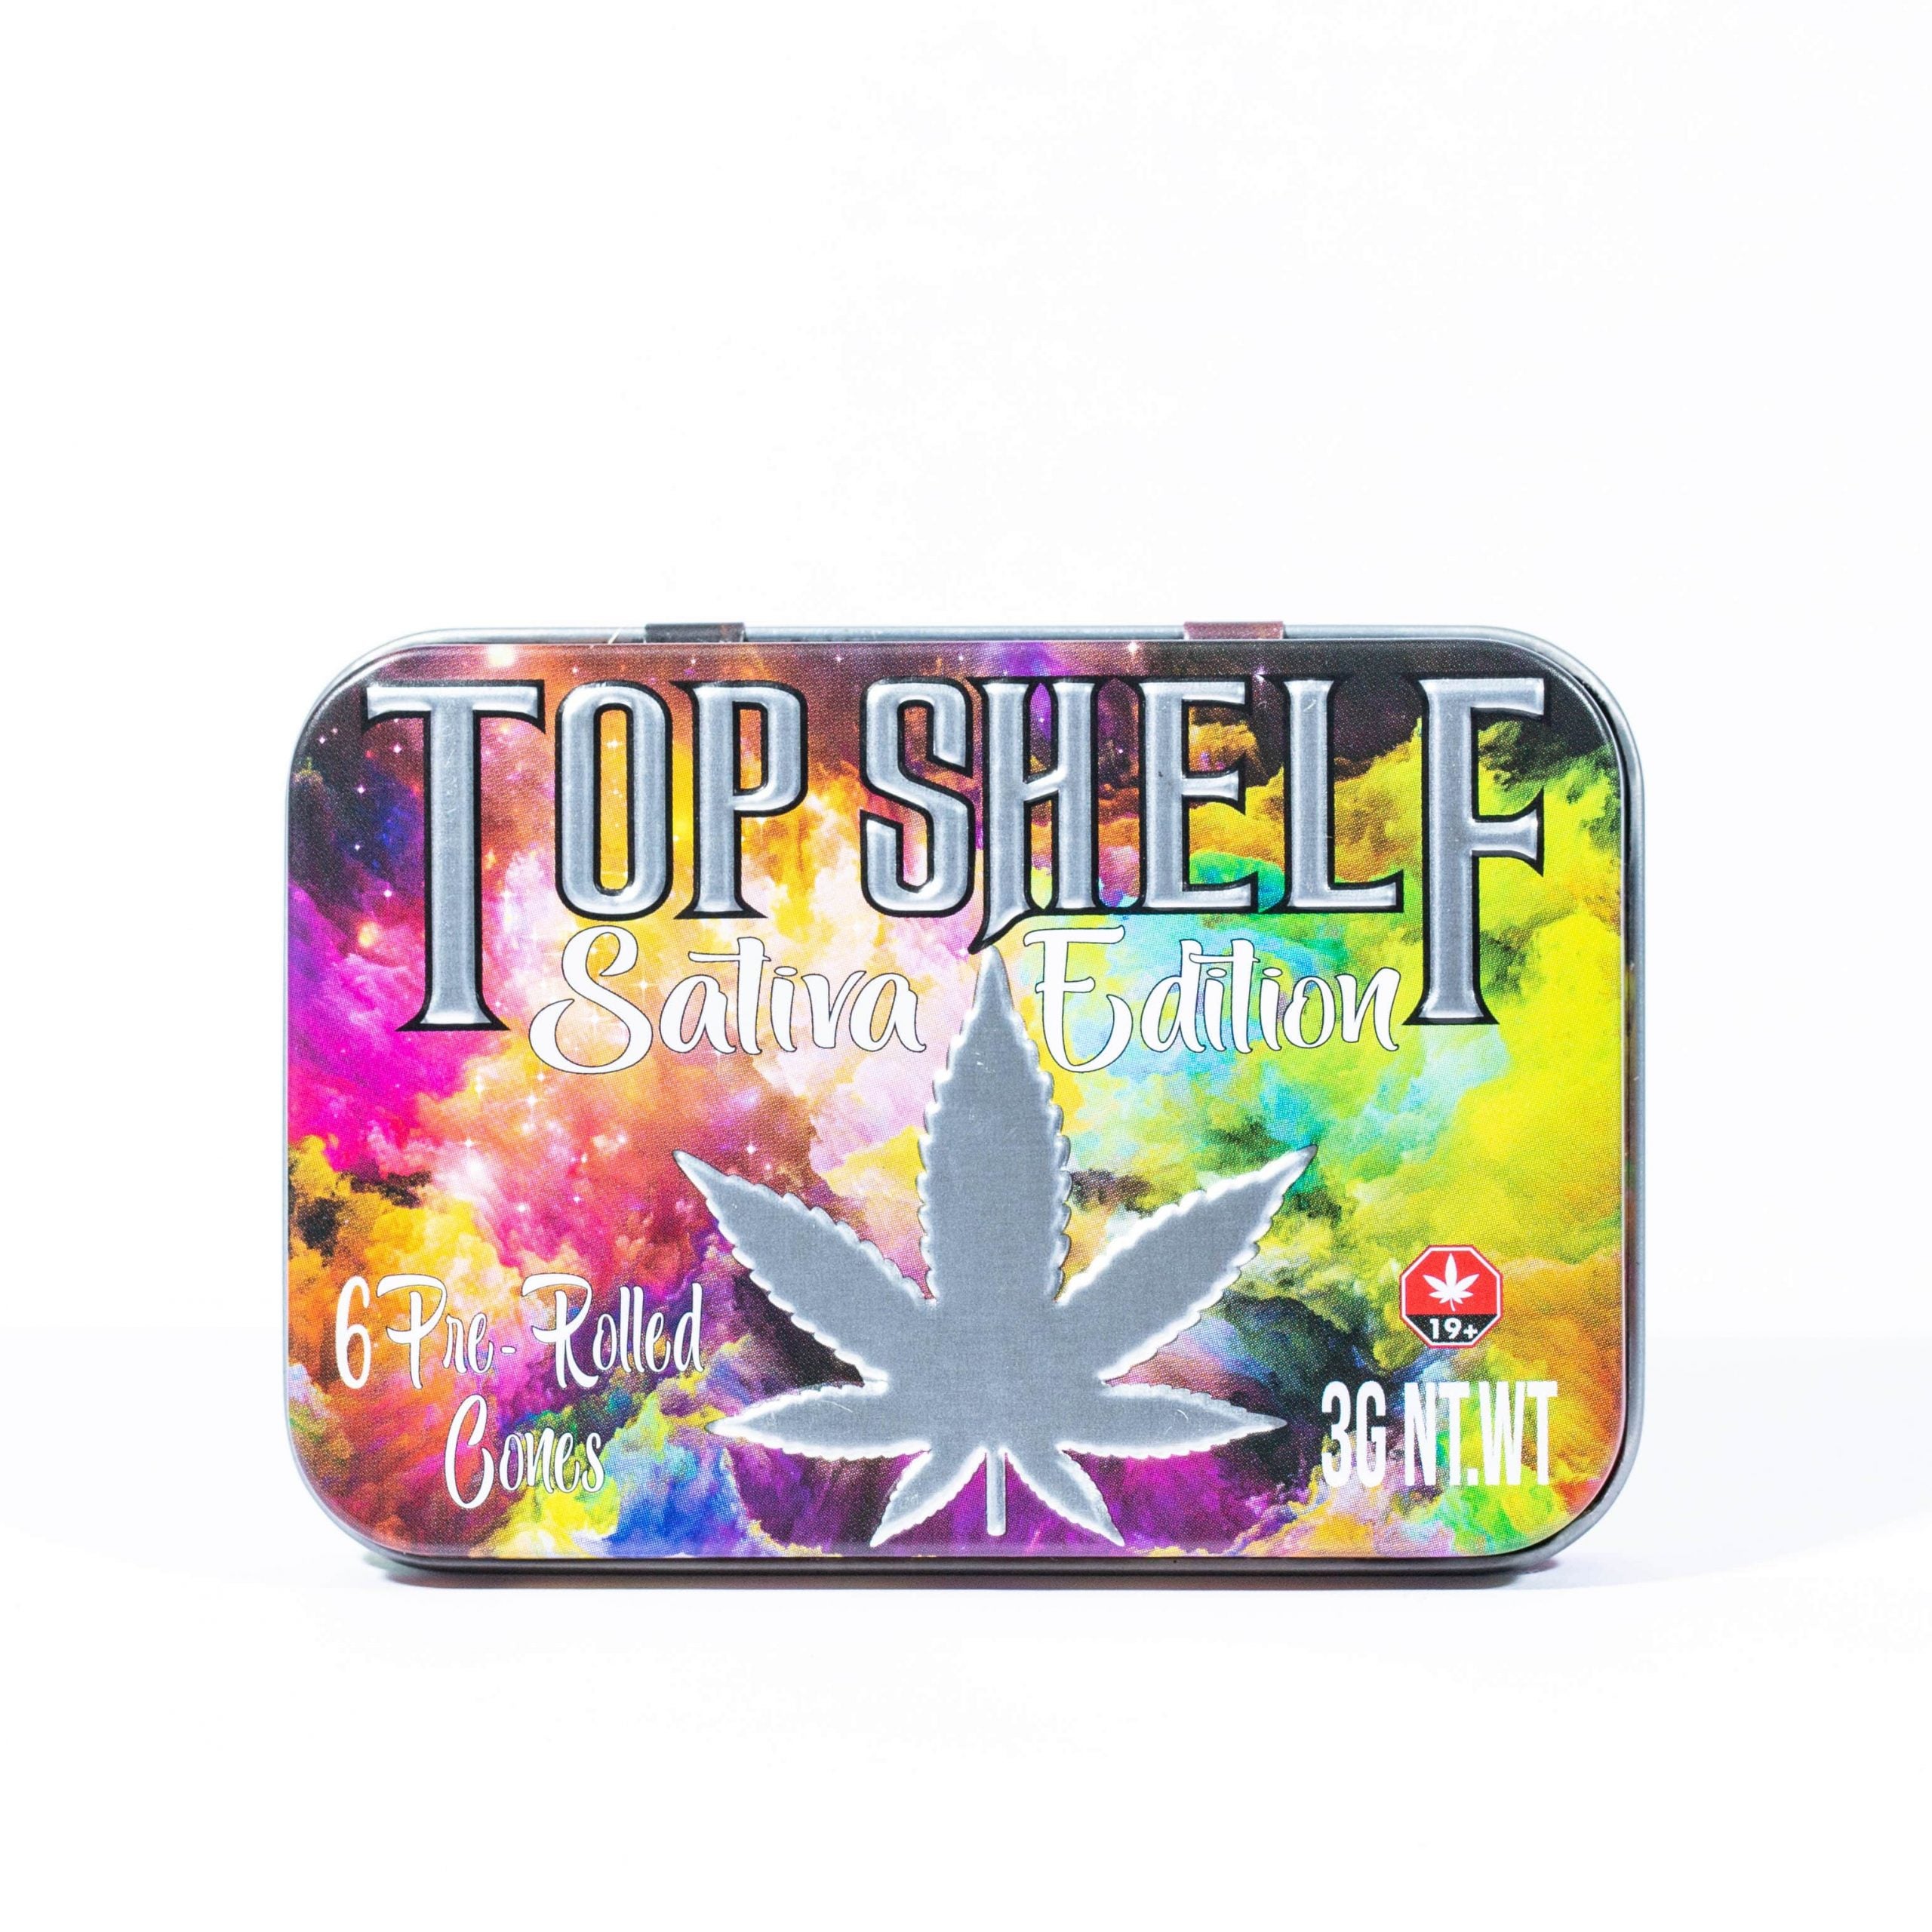 Top Self Pre-Roll Variety Pack Tin of Doobdasher